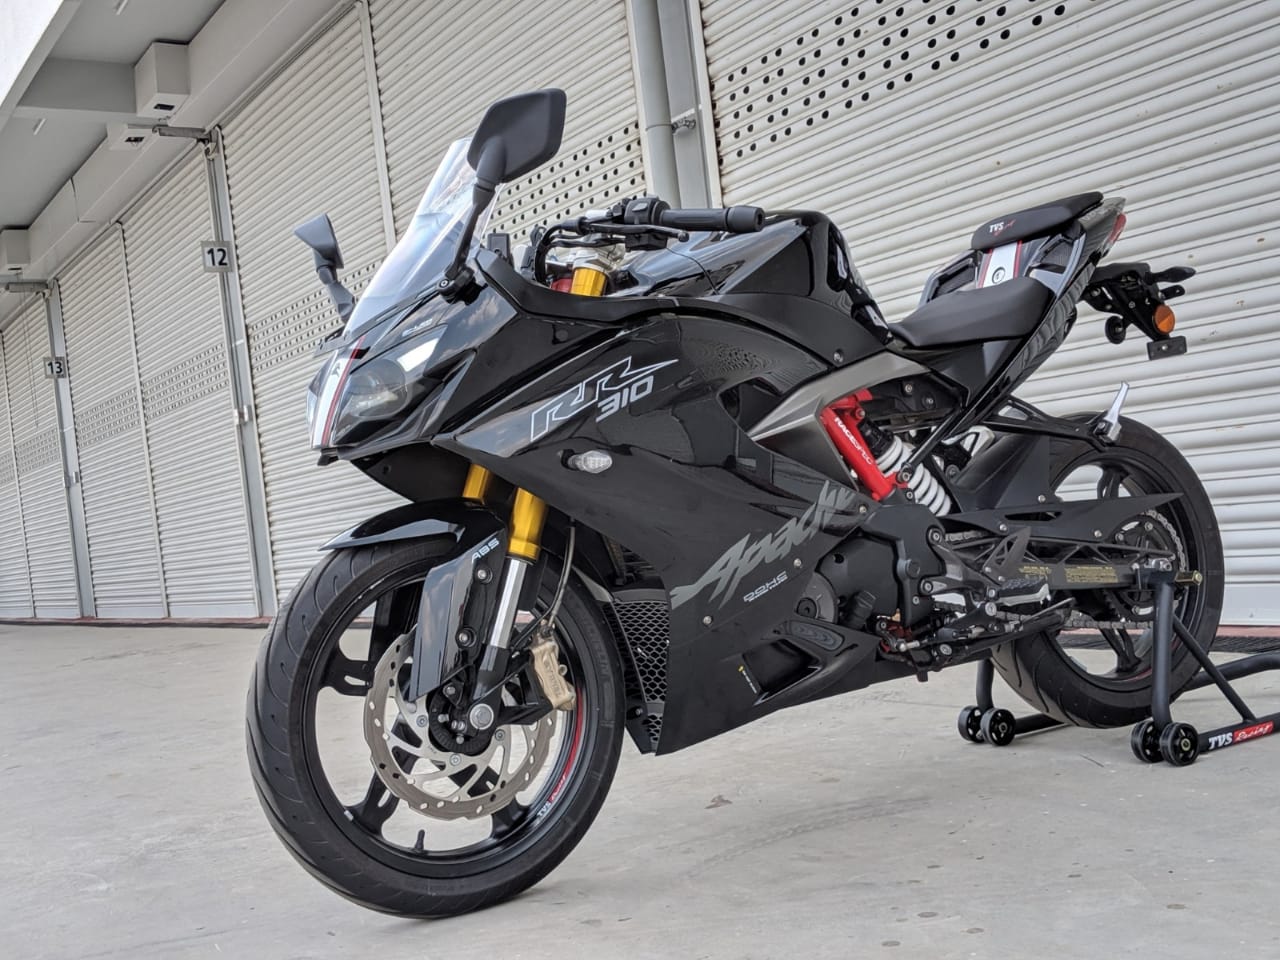 Bs6 Tvs Apache Rr 310 India Launch Likely In January 2020